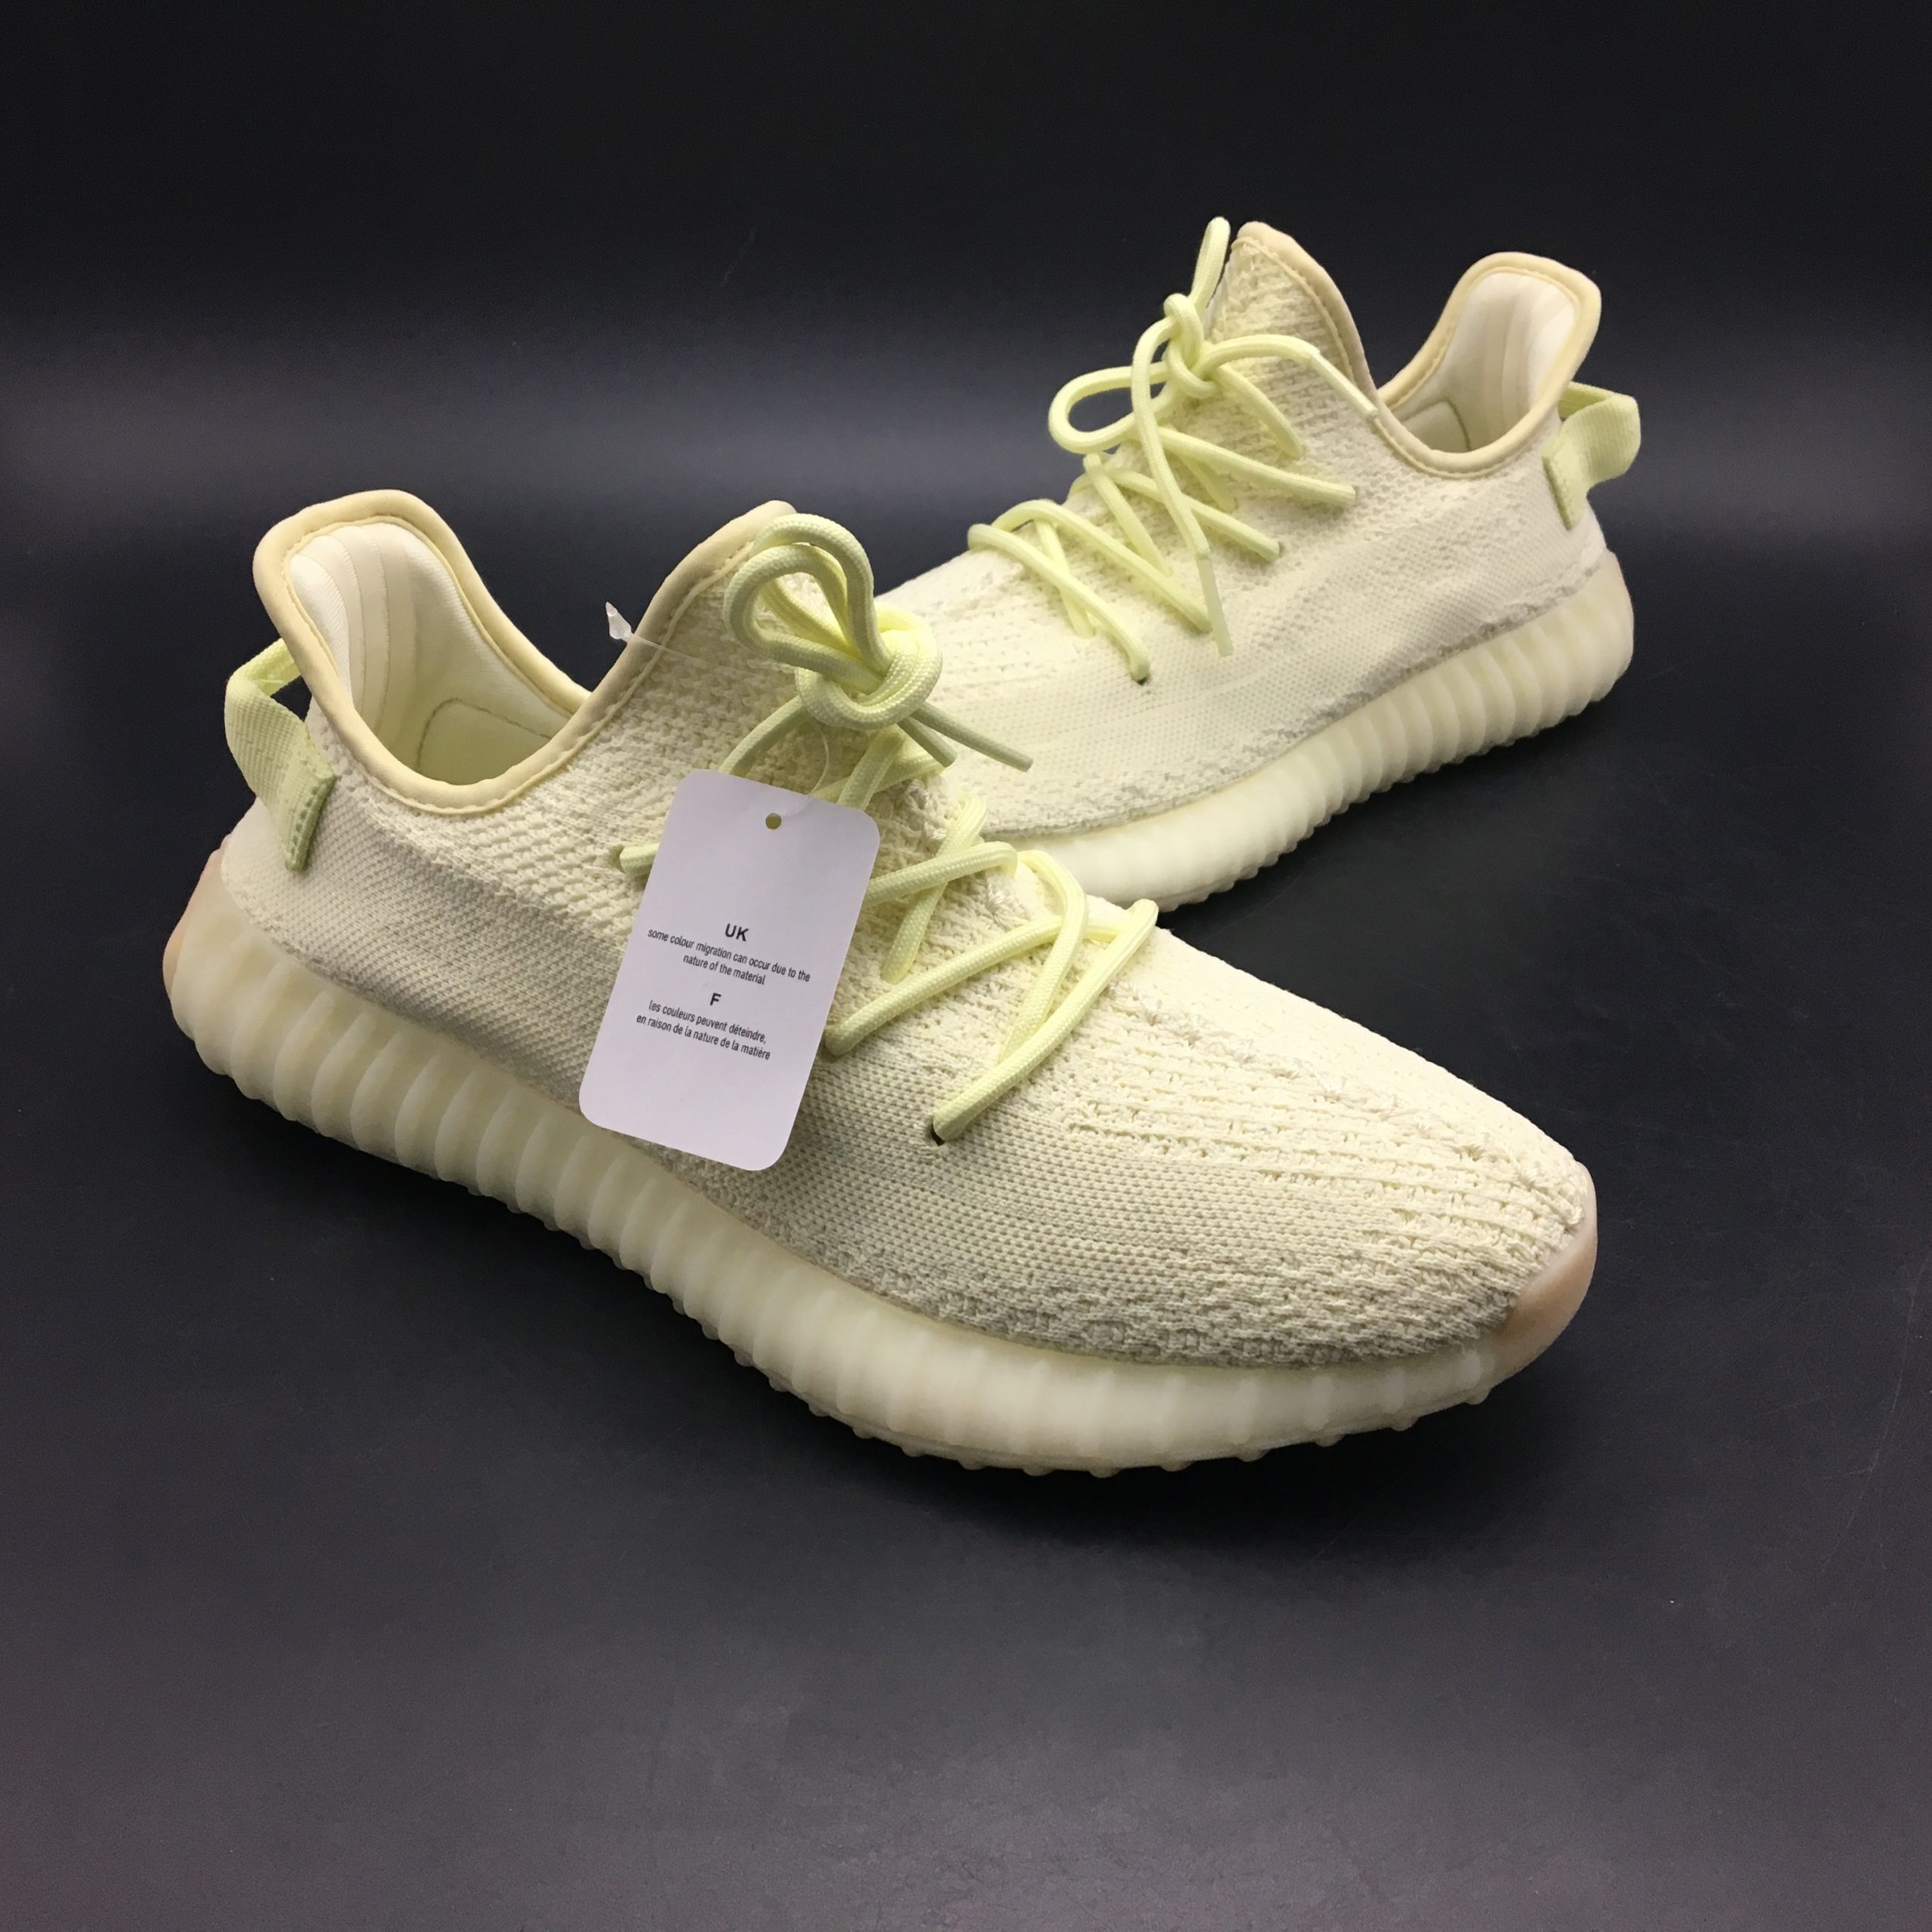 Adidas Yeezy 350 Boost V2-F36980-Off White free shipping